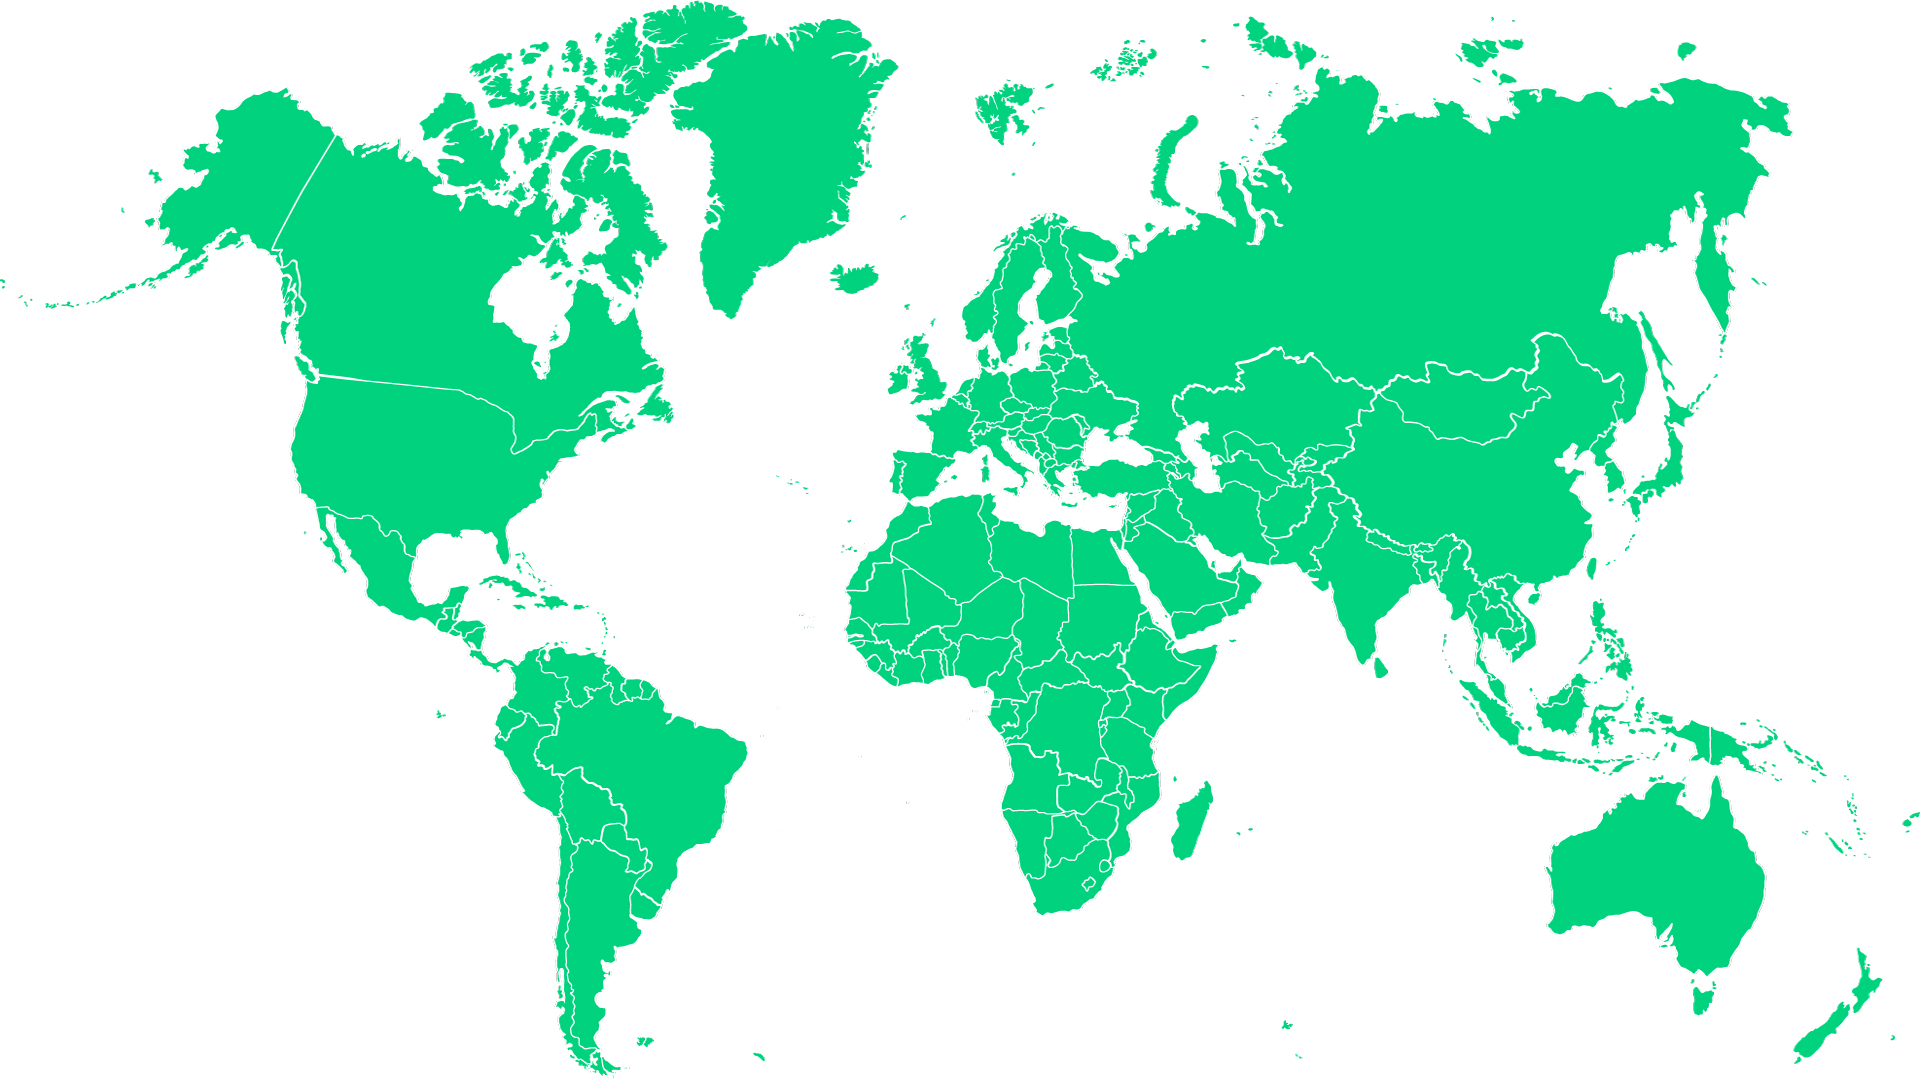 The image shows a green world map on a white background